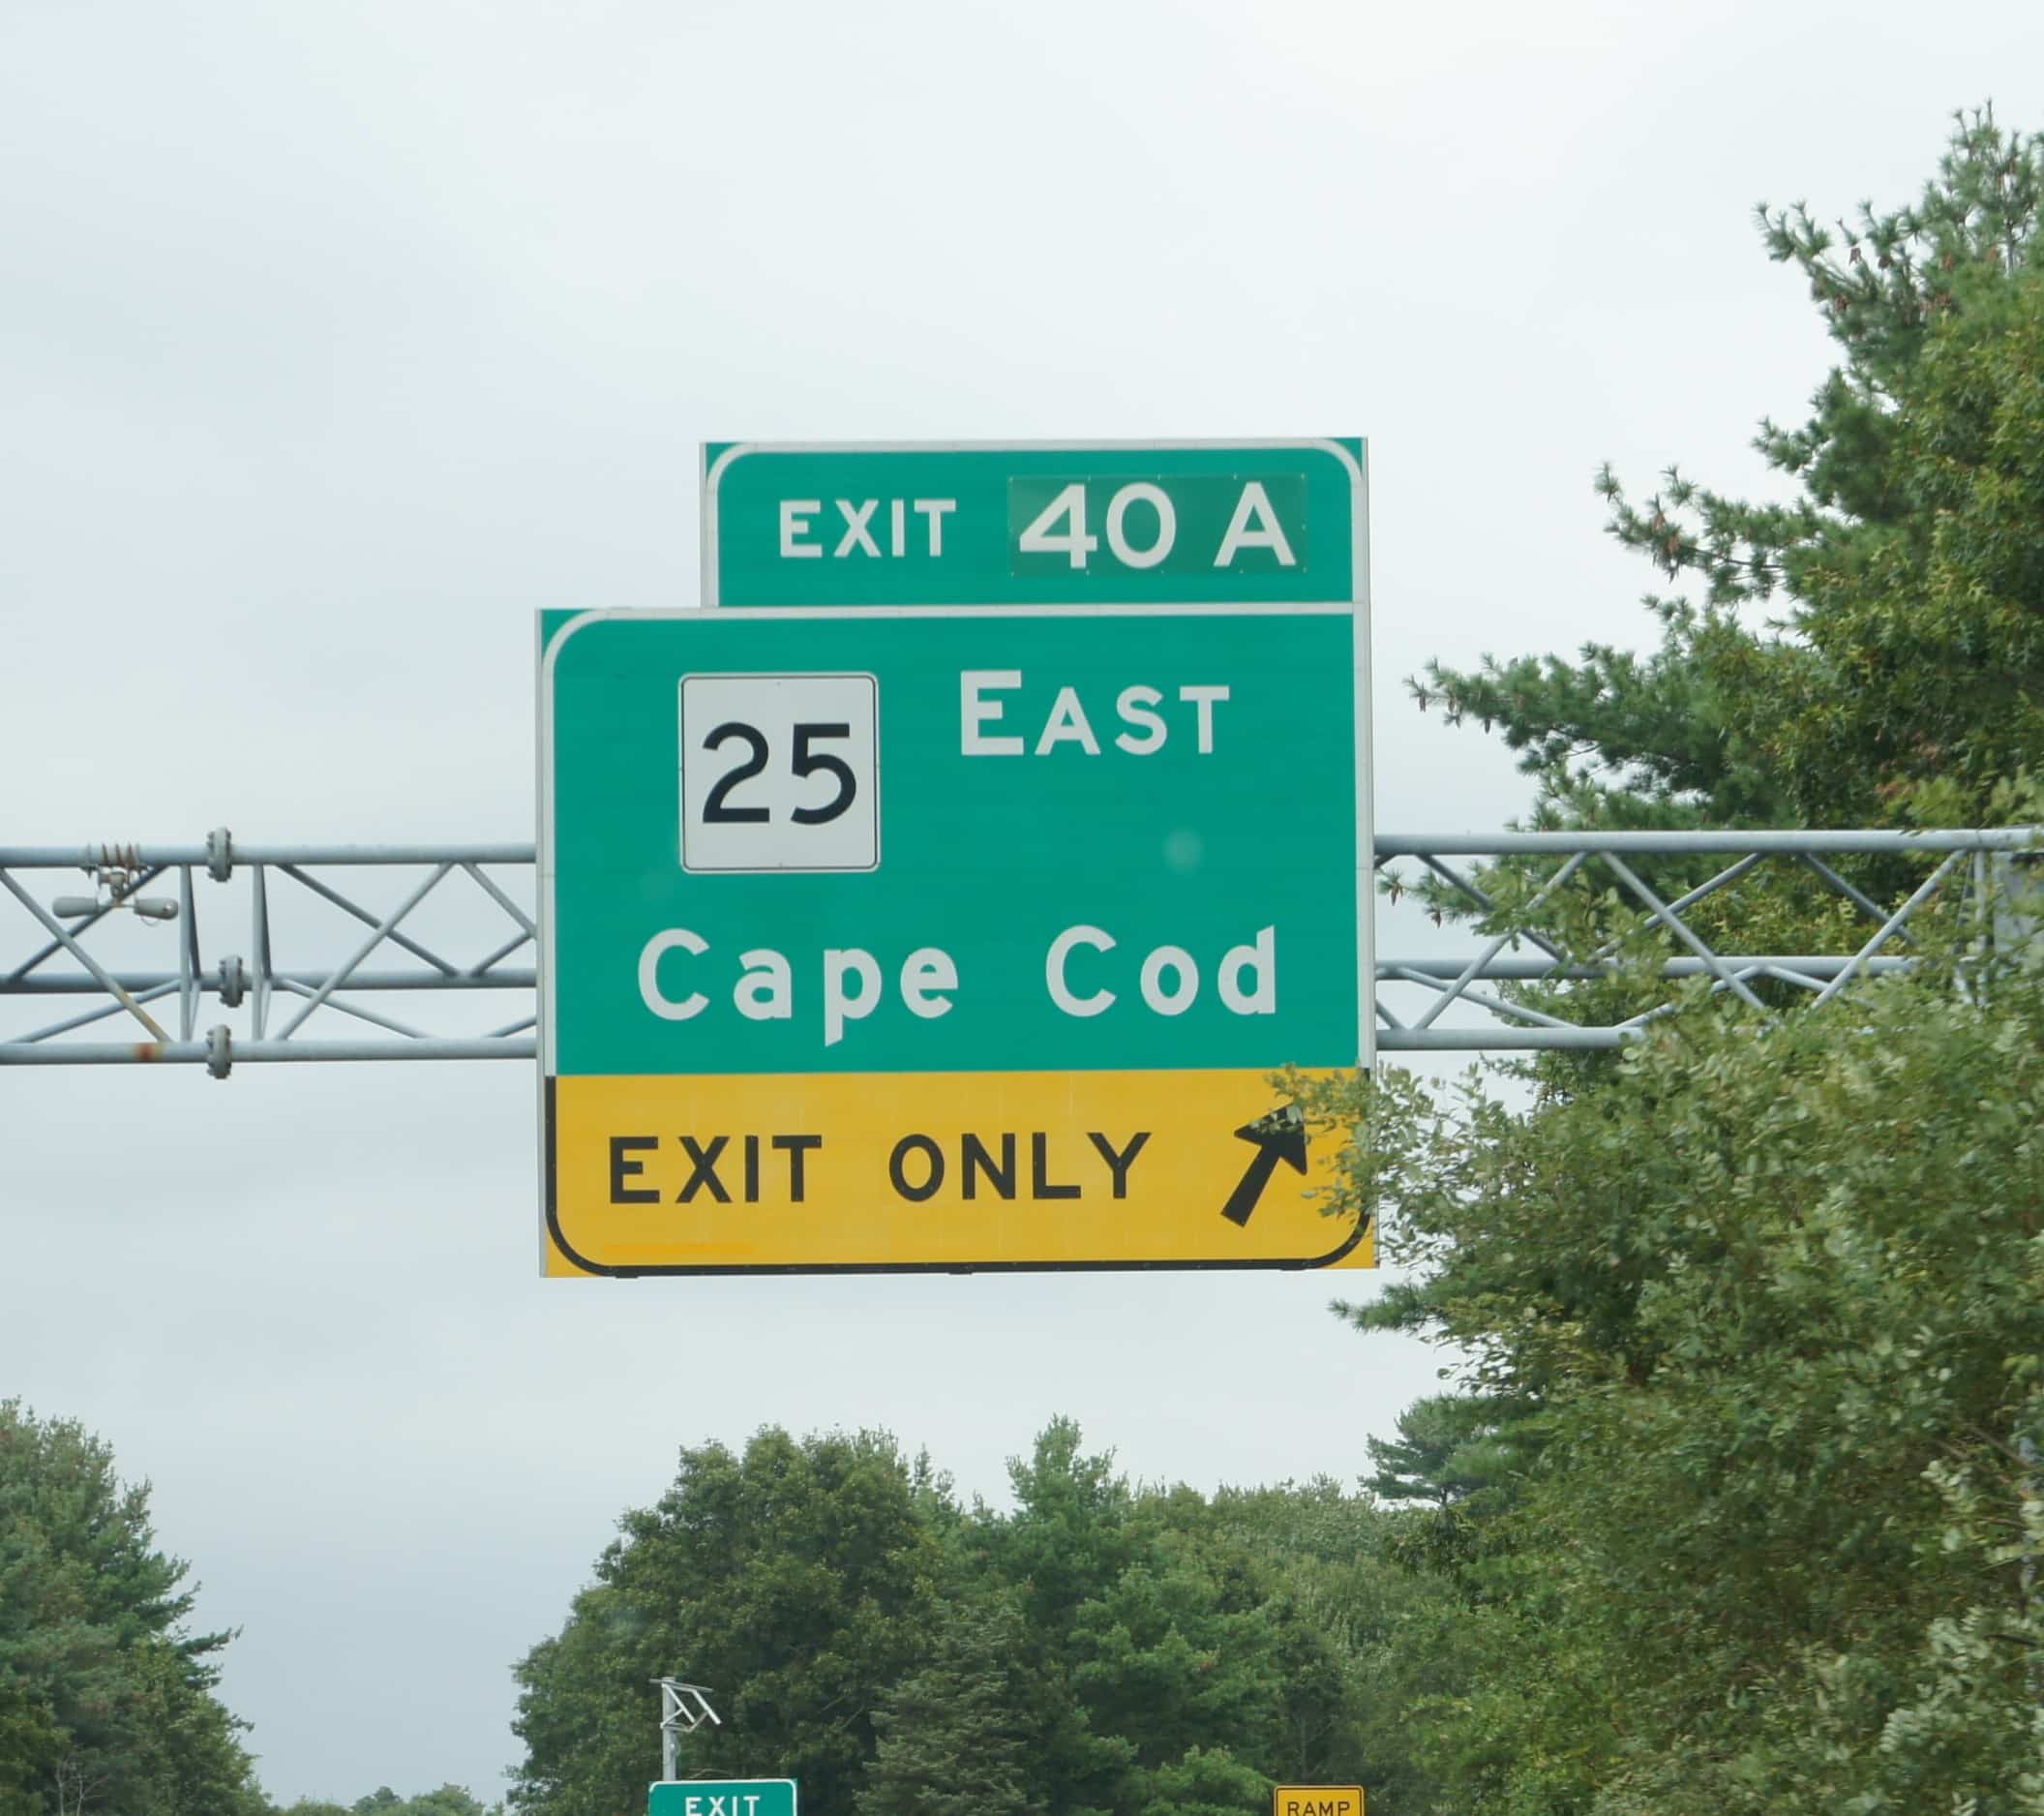 Arriving in Cape Cod